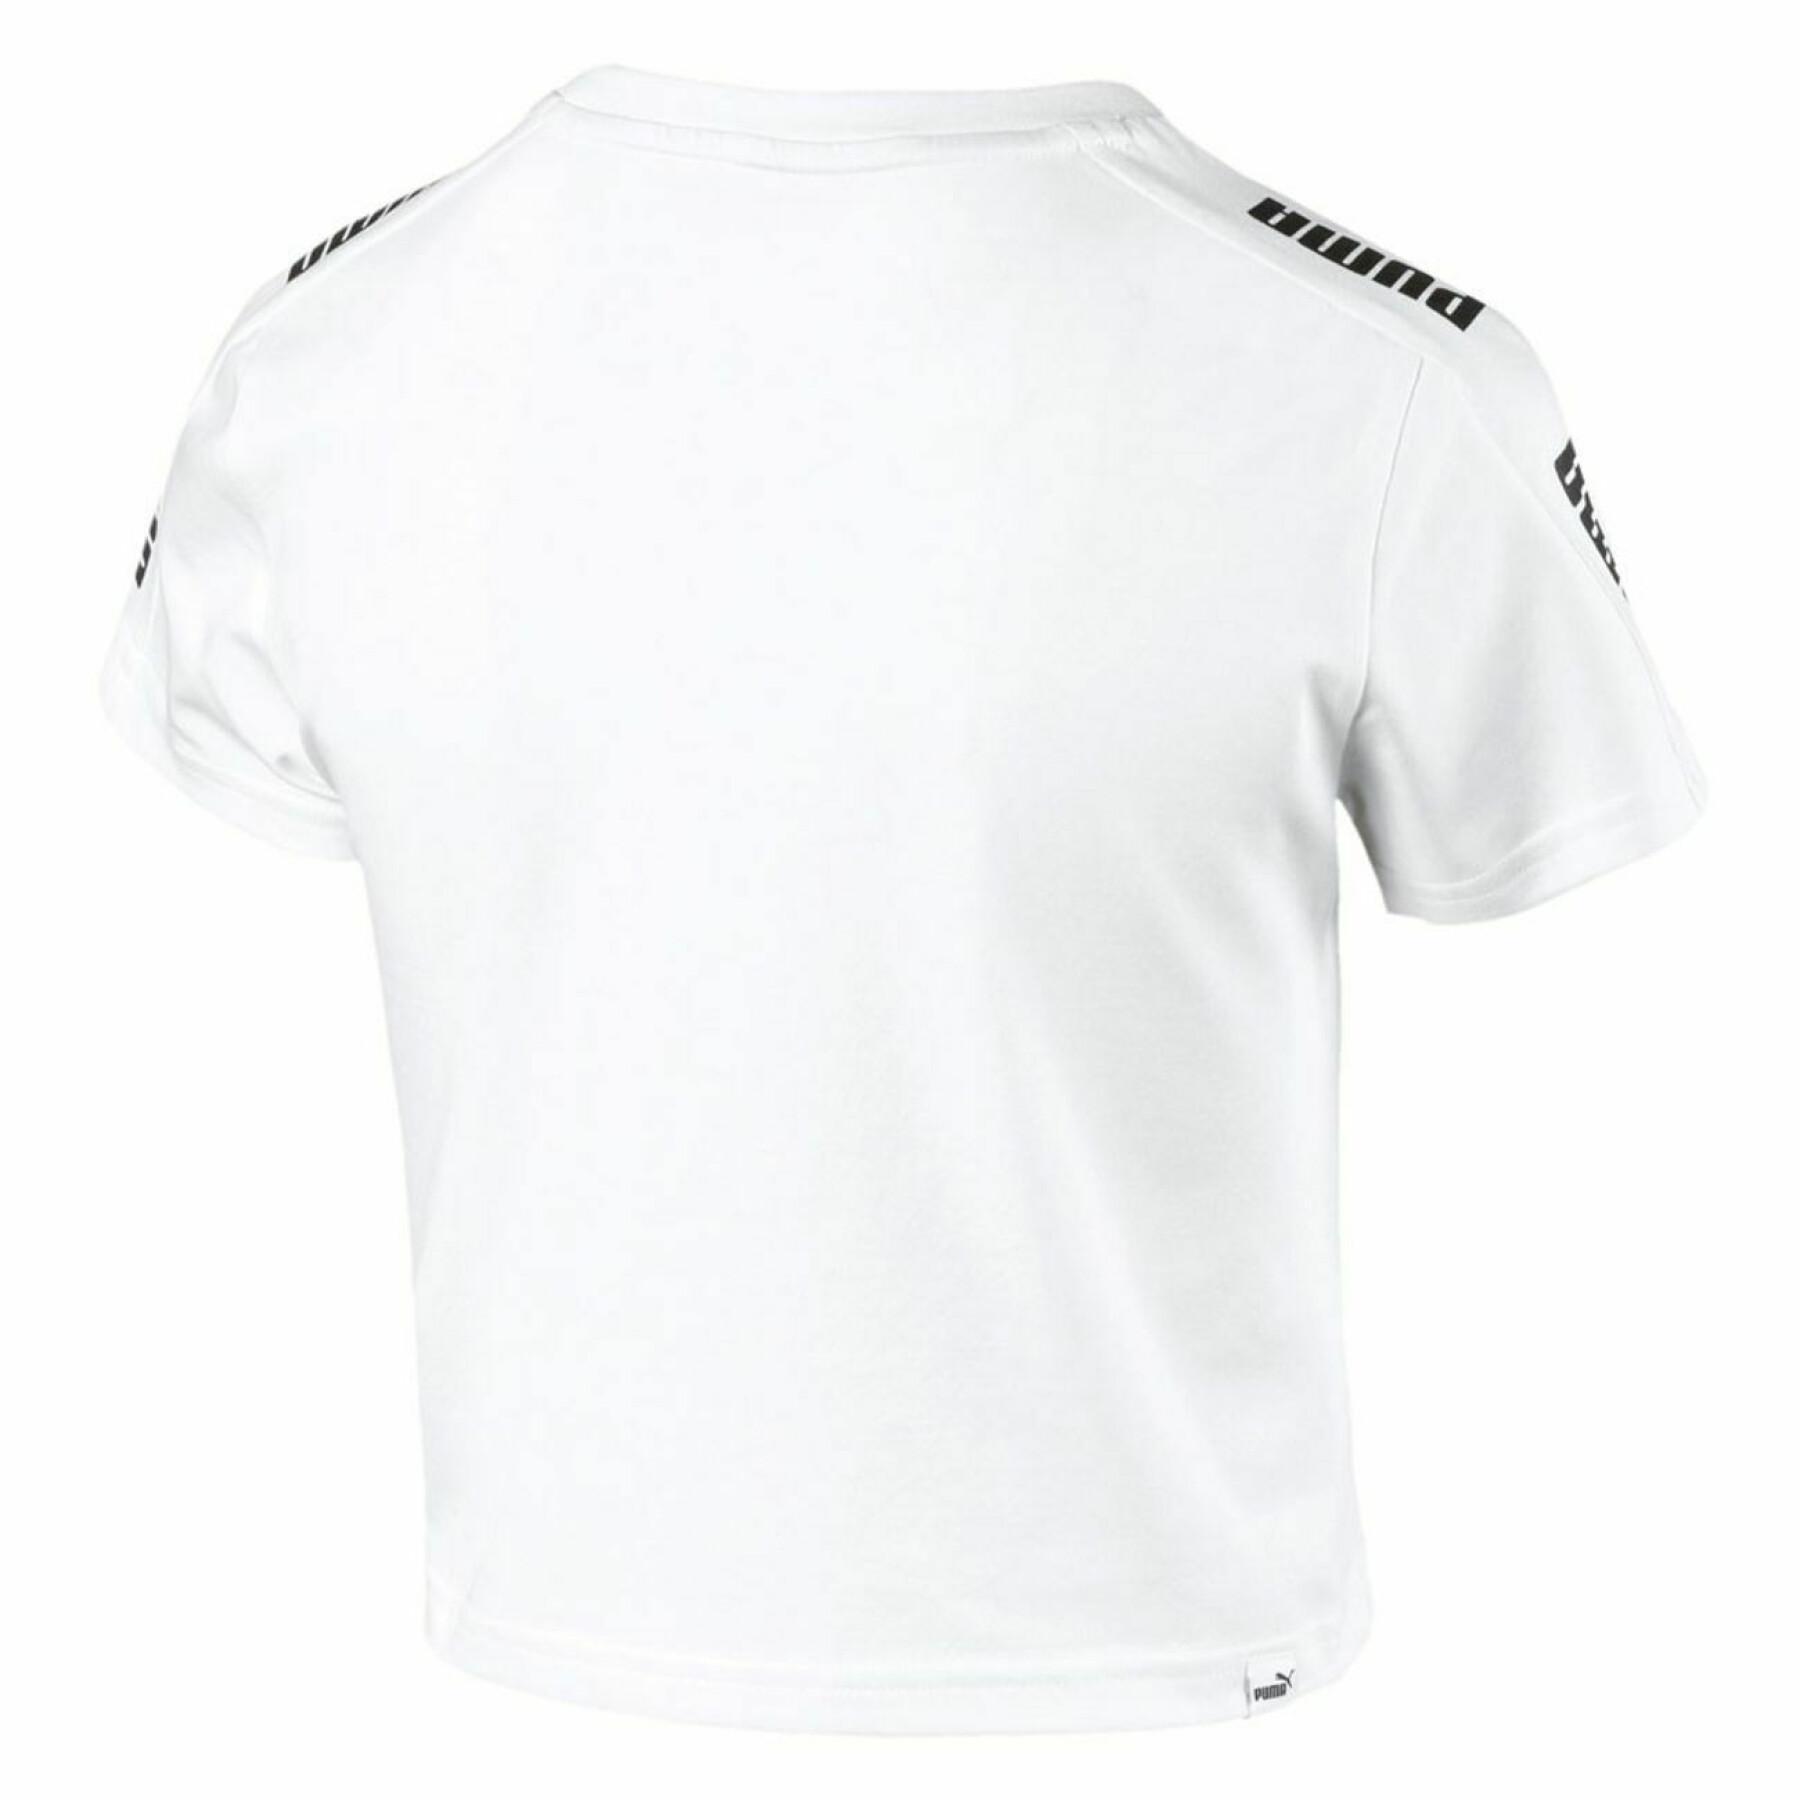 Camiseta de mujer Puma Amplified logo fitted